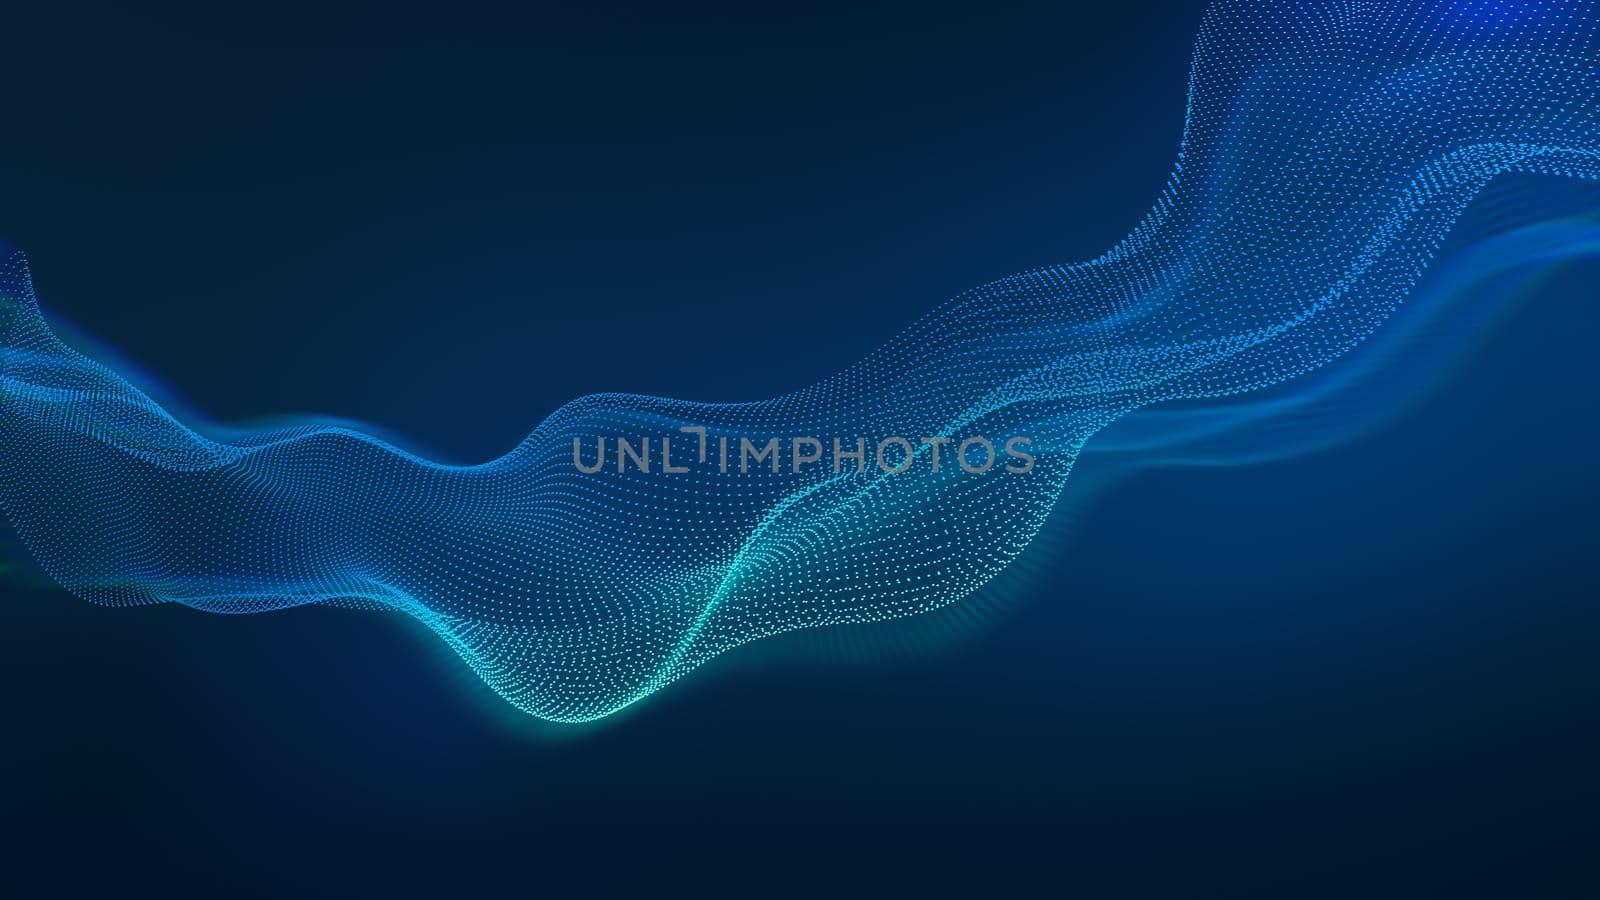 Beauty abstract wave technology background with blue led light. Tech business concept. 3d rendering.